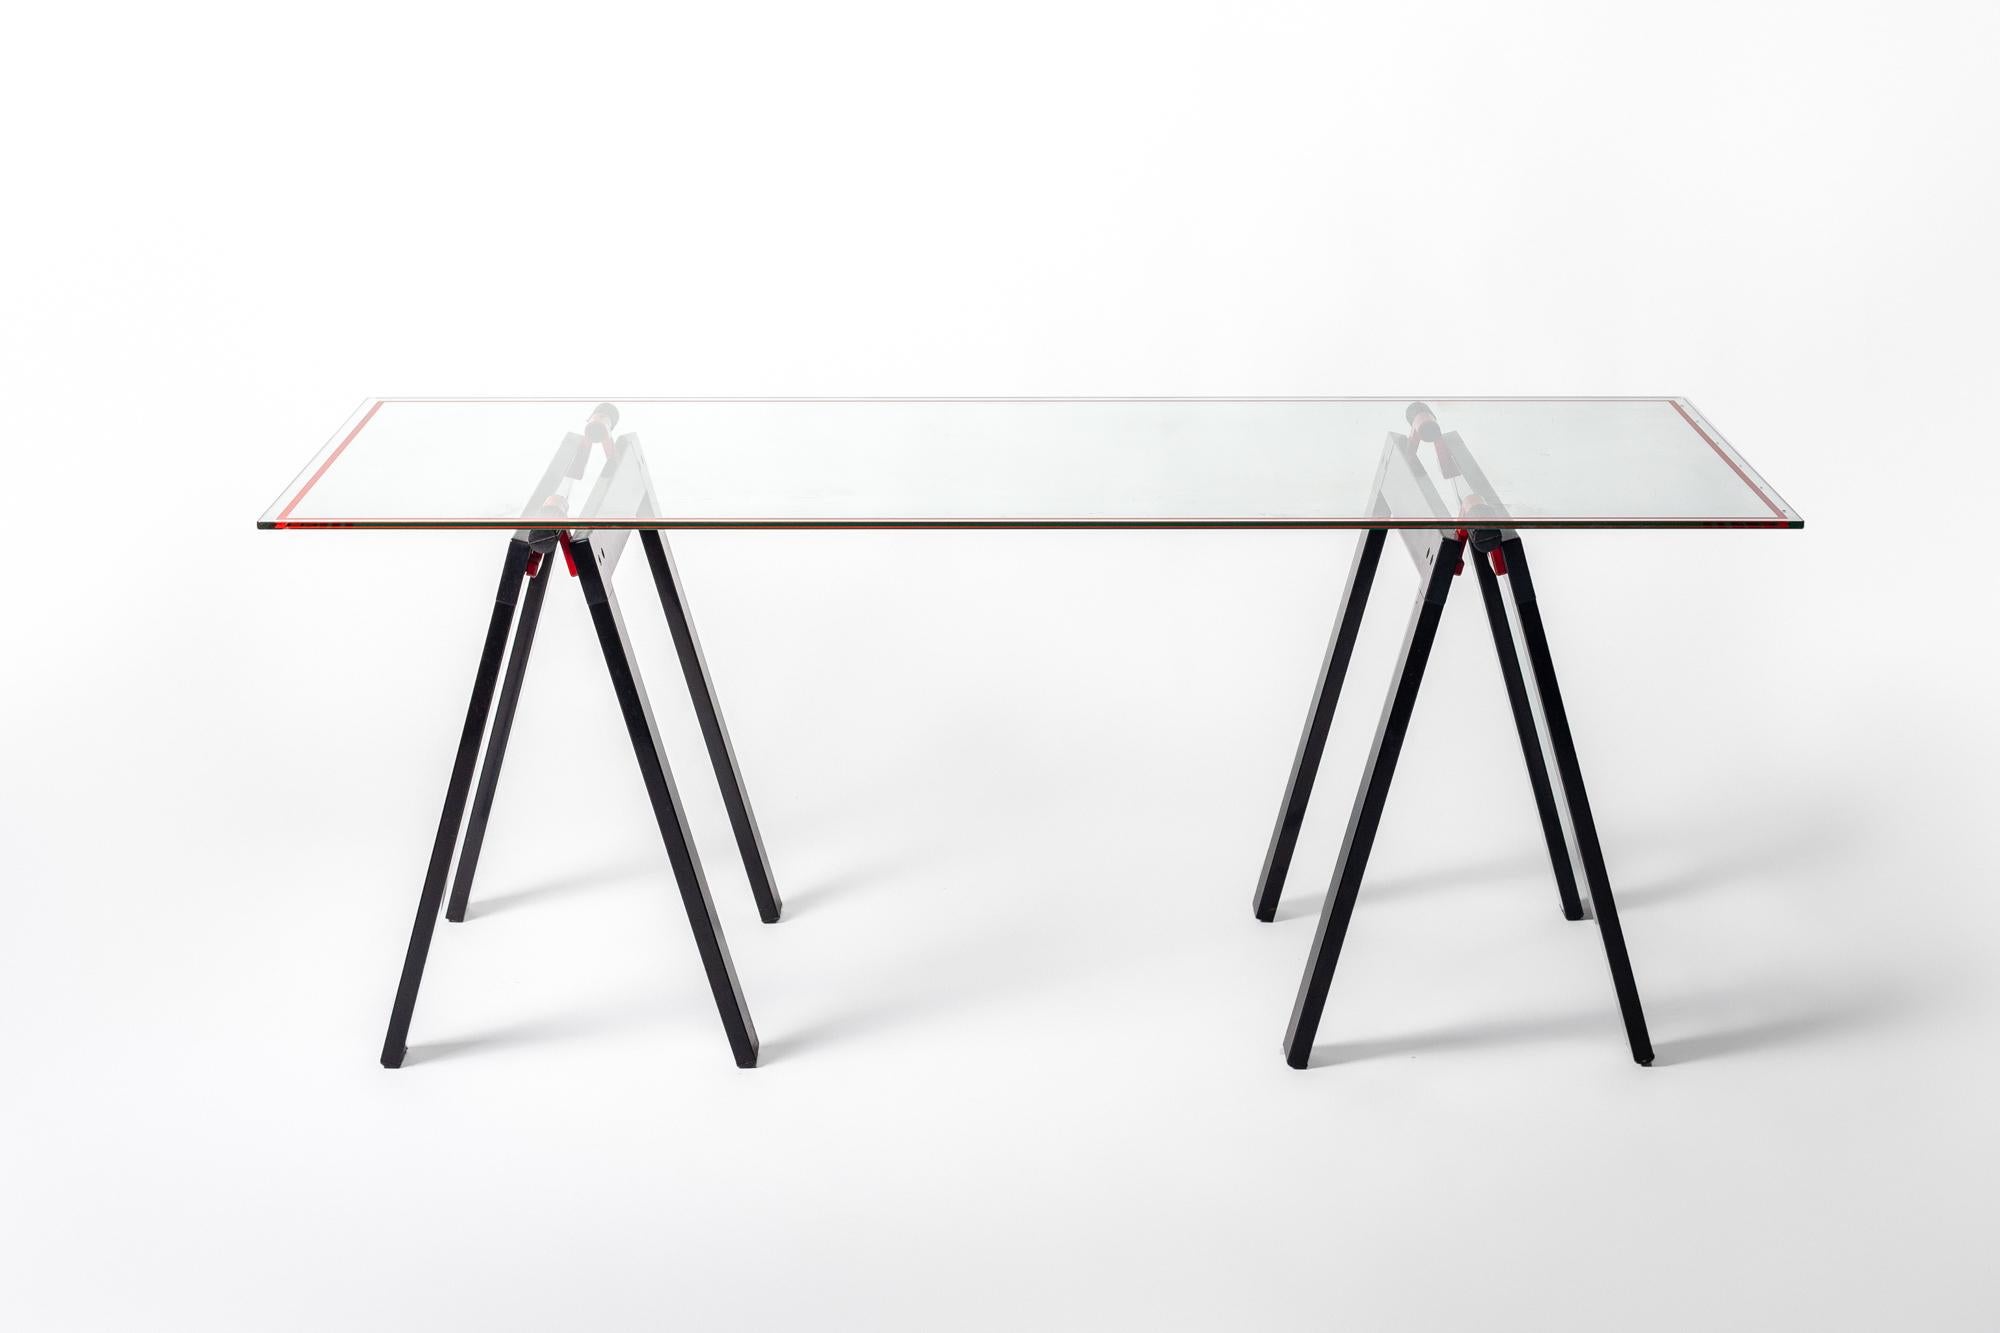 The Gaetano table by Gae Aulenti for Zanotta features its original glass top with black and red enameled metal folding sawhorse legs. 

Gae Aulenti was a renowned Italian architect and furniture designer known for iconic designs including the Jumbo